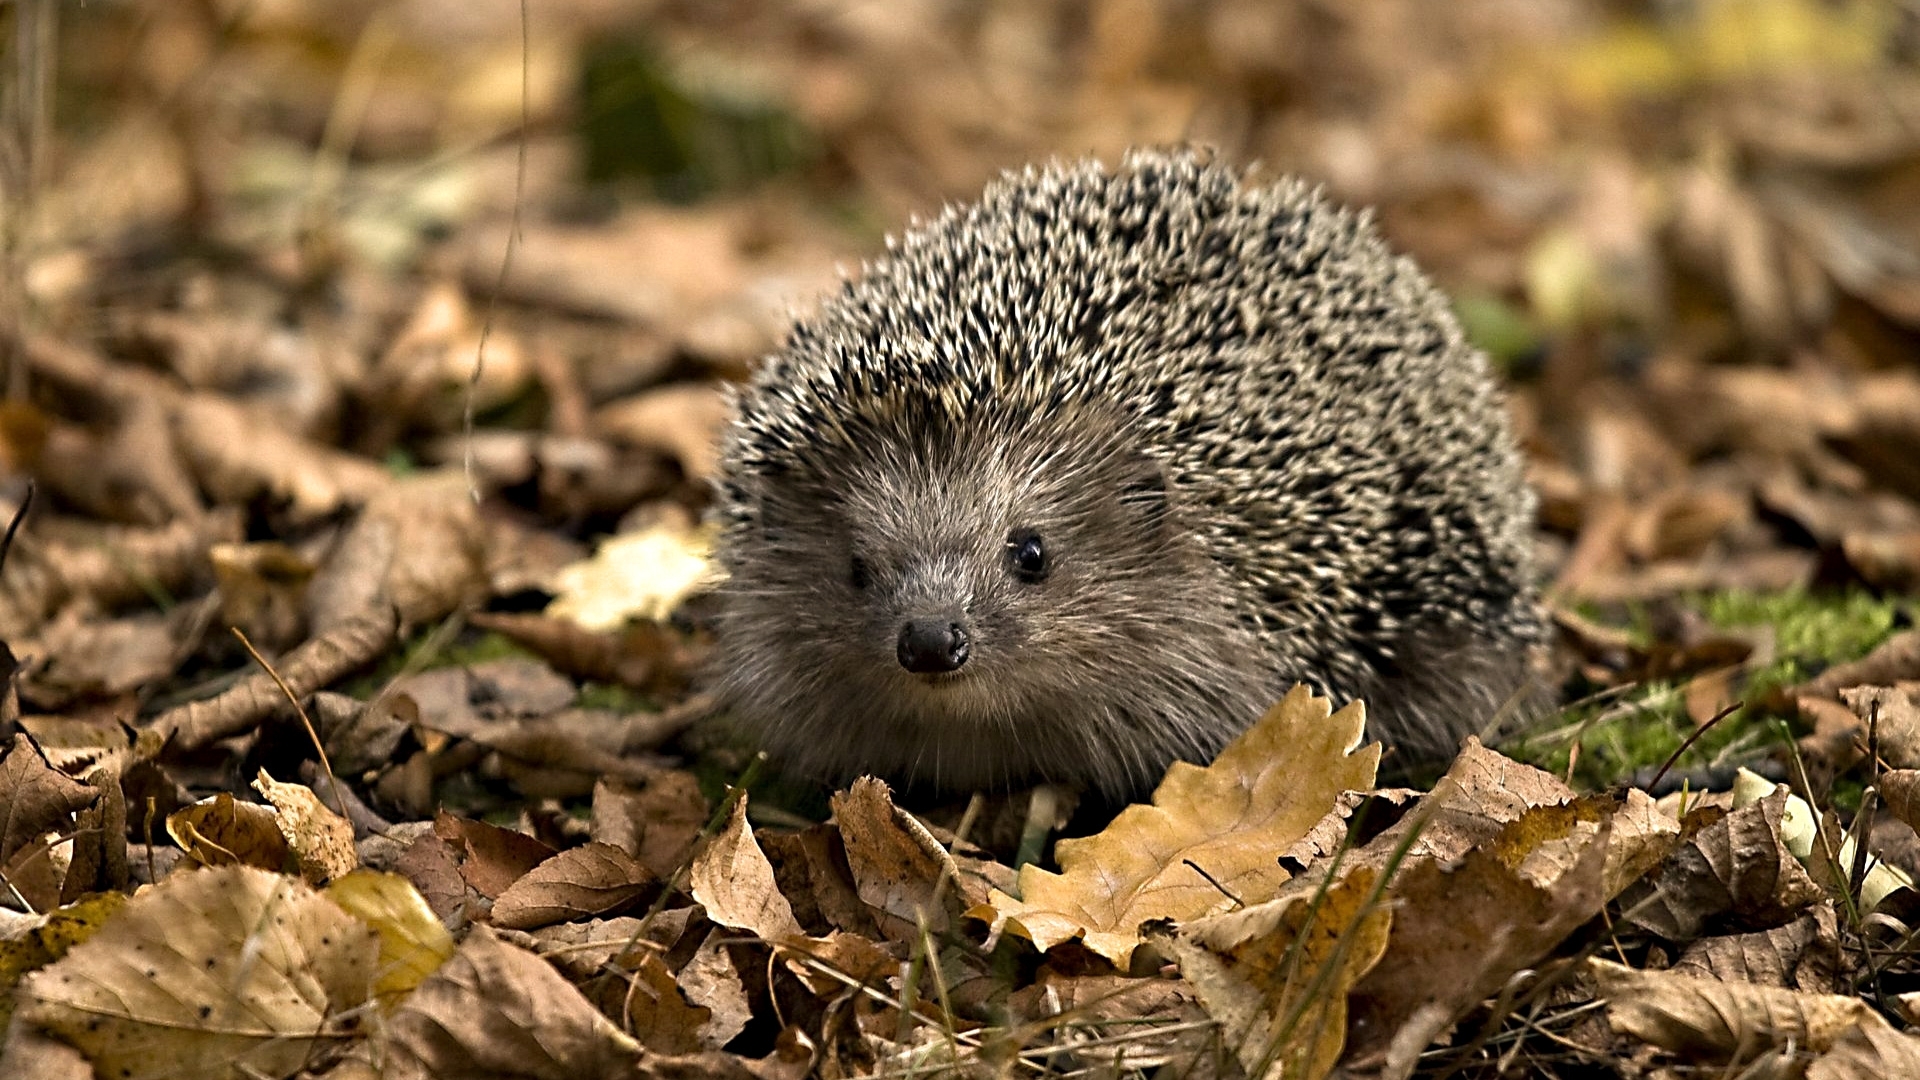 47821 download wallpaper animals, hedgehogs, orange screensavers and pictures for free